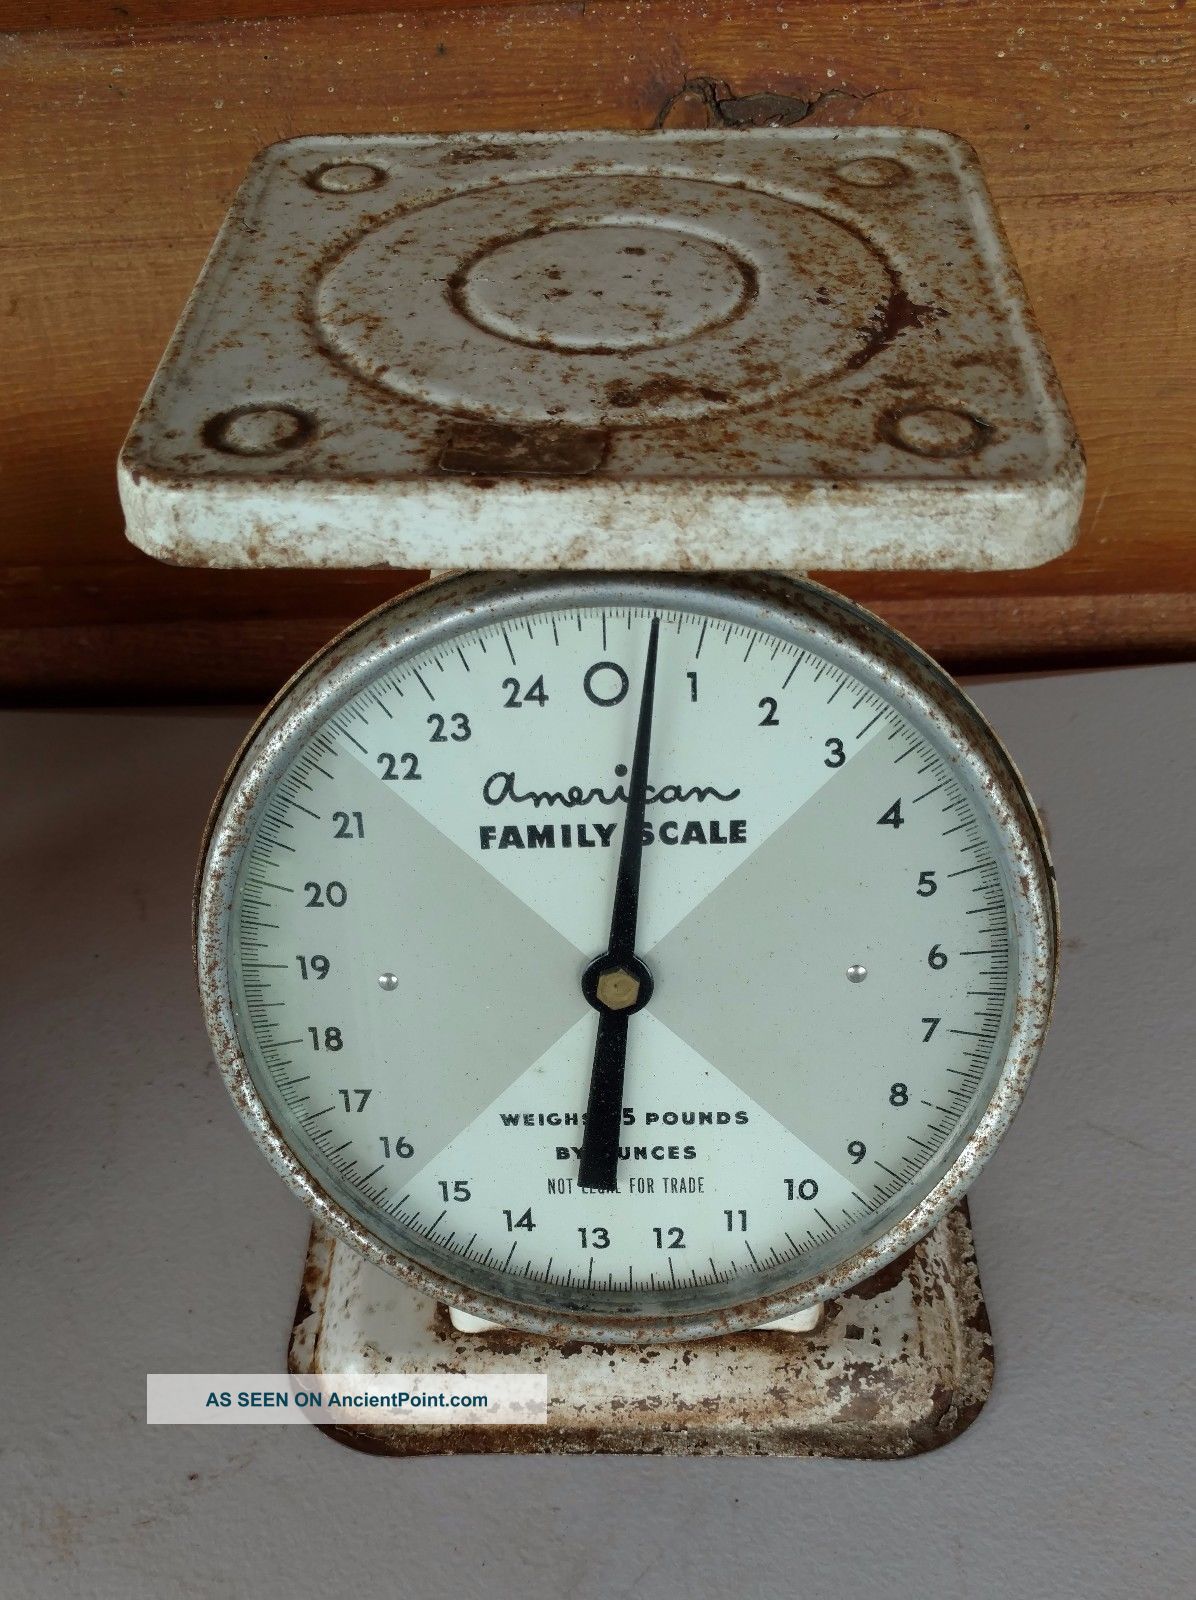 Vintage American Family Scale 25 Lb By Oz Kitchen Counter Scale Antique Decor Scales photo